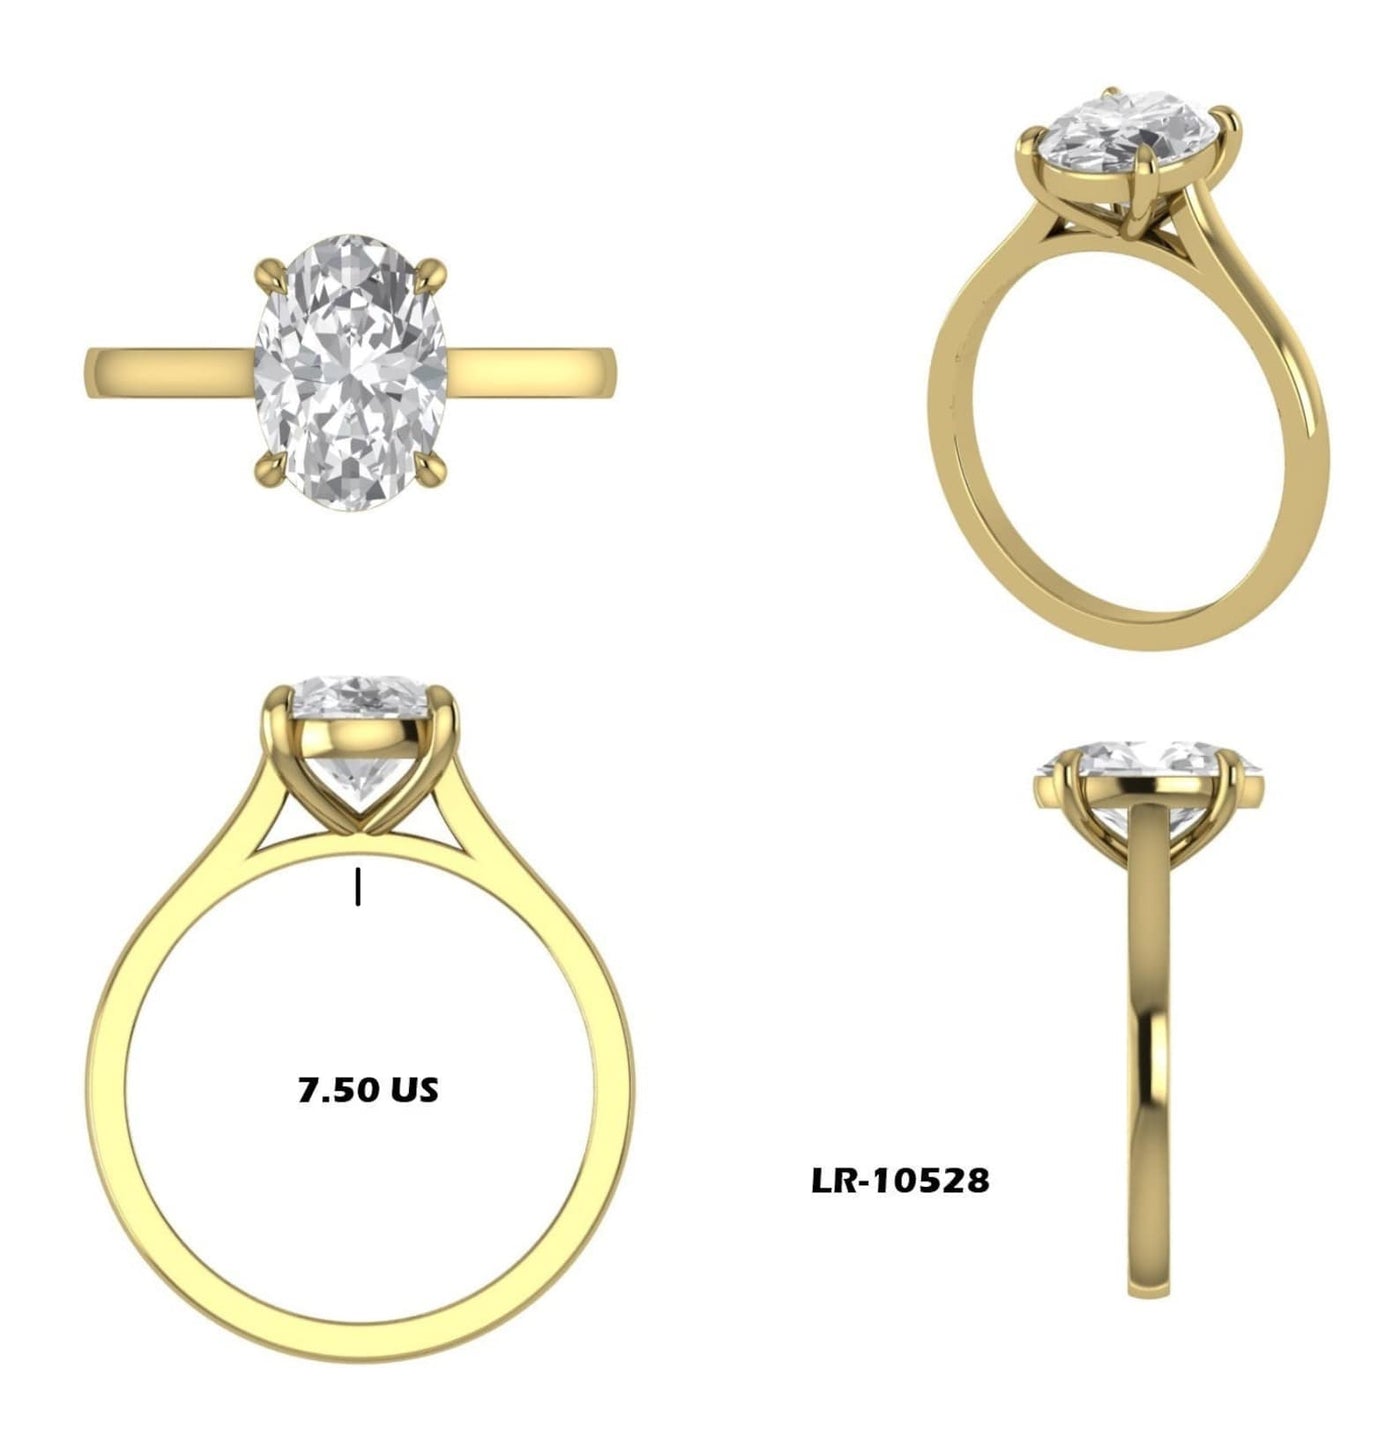 Custom Order For Kay: 3.17CT Certified Oval Cut Lab Diamond Solitaire Ring Made In 10K Solid Yellow Gold